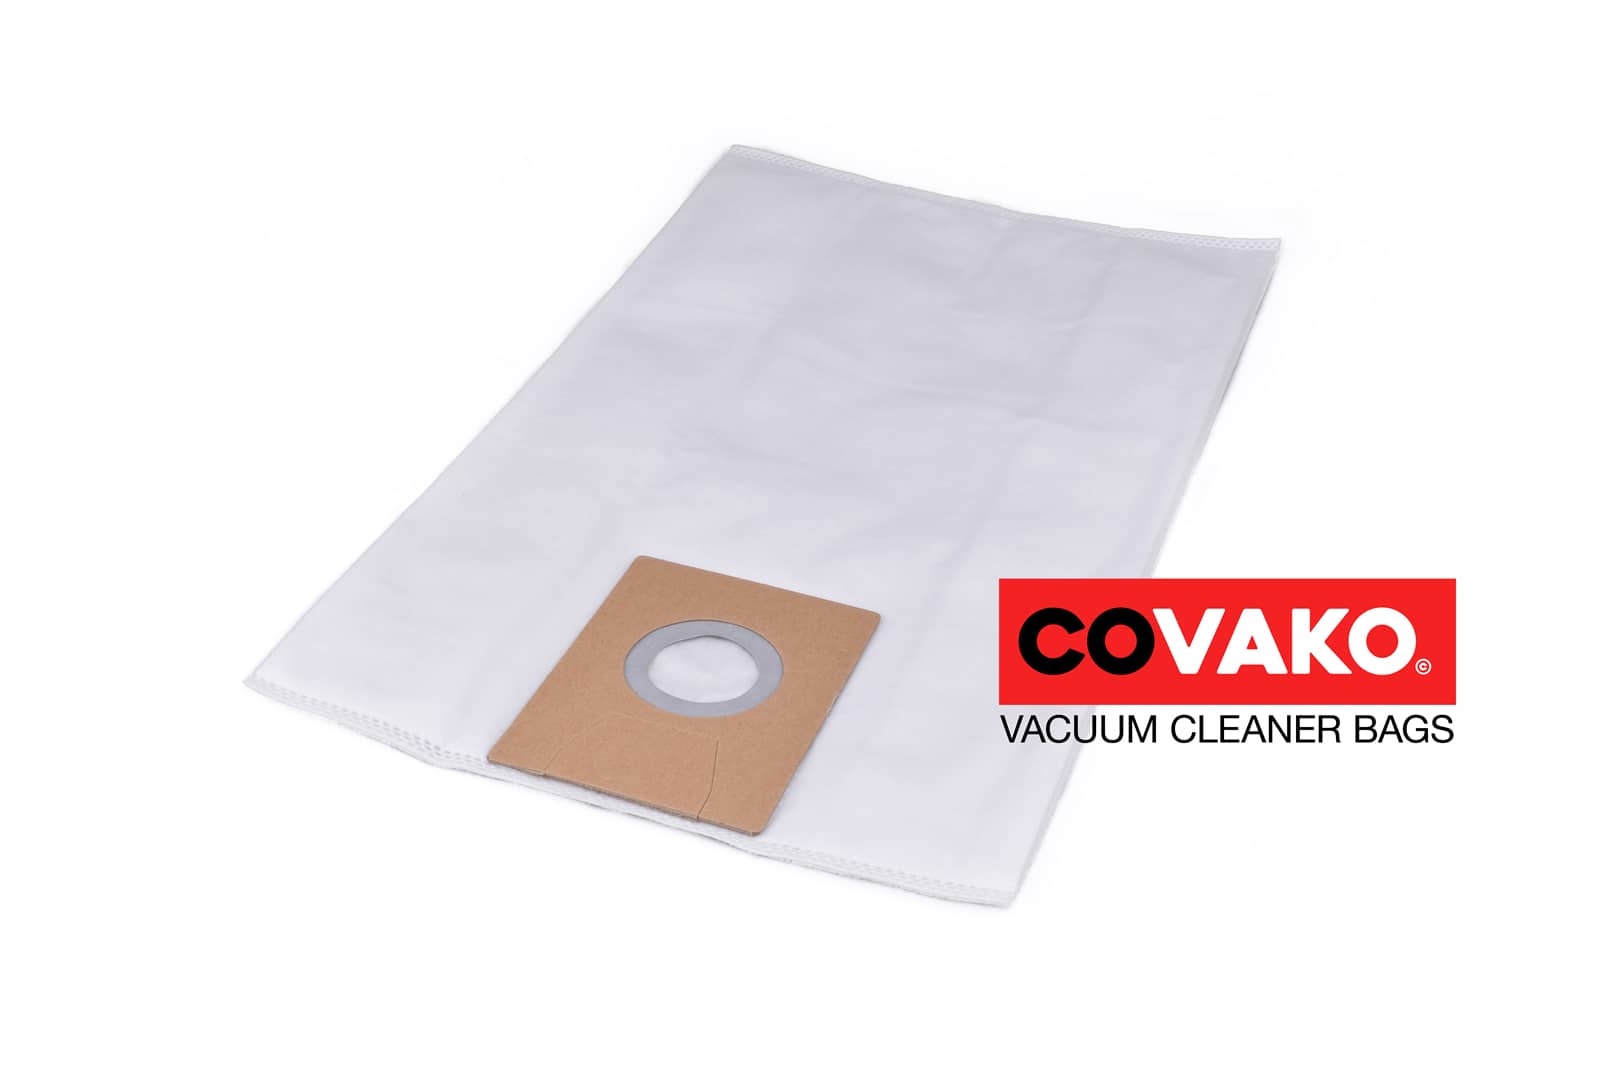 Fakir S 20 Eco Power / Synthesis - Fakir vacuum cleaner bags